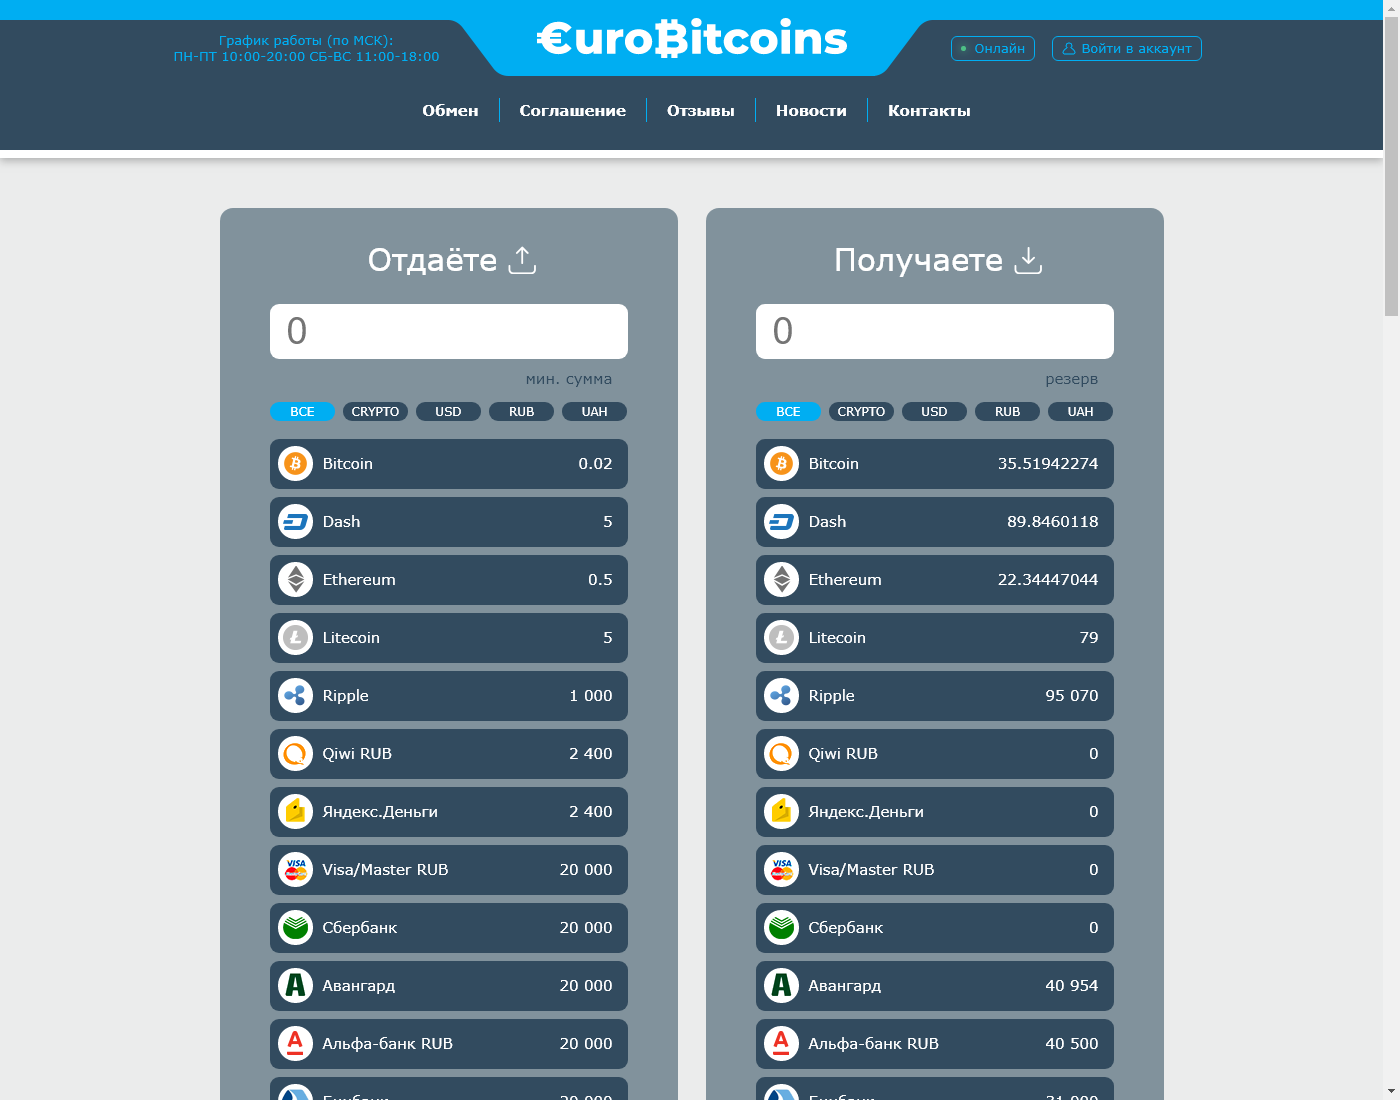 eurobitcoins user interface: the home page in English